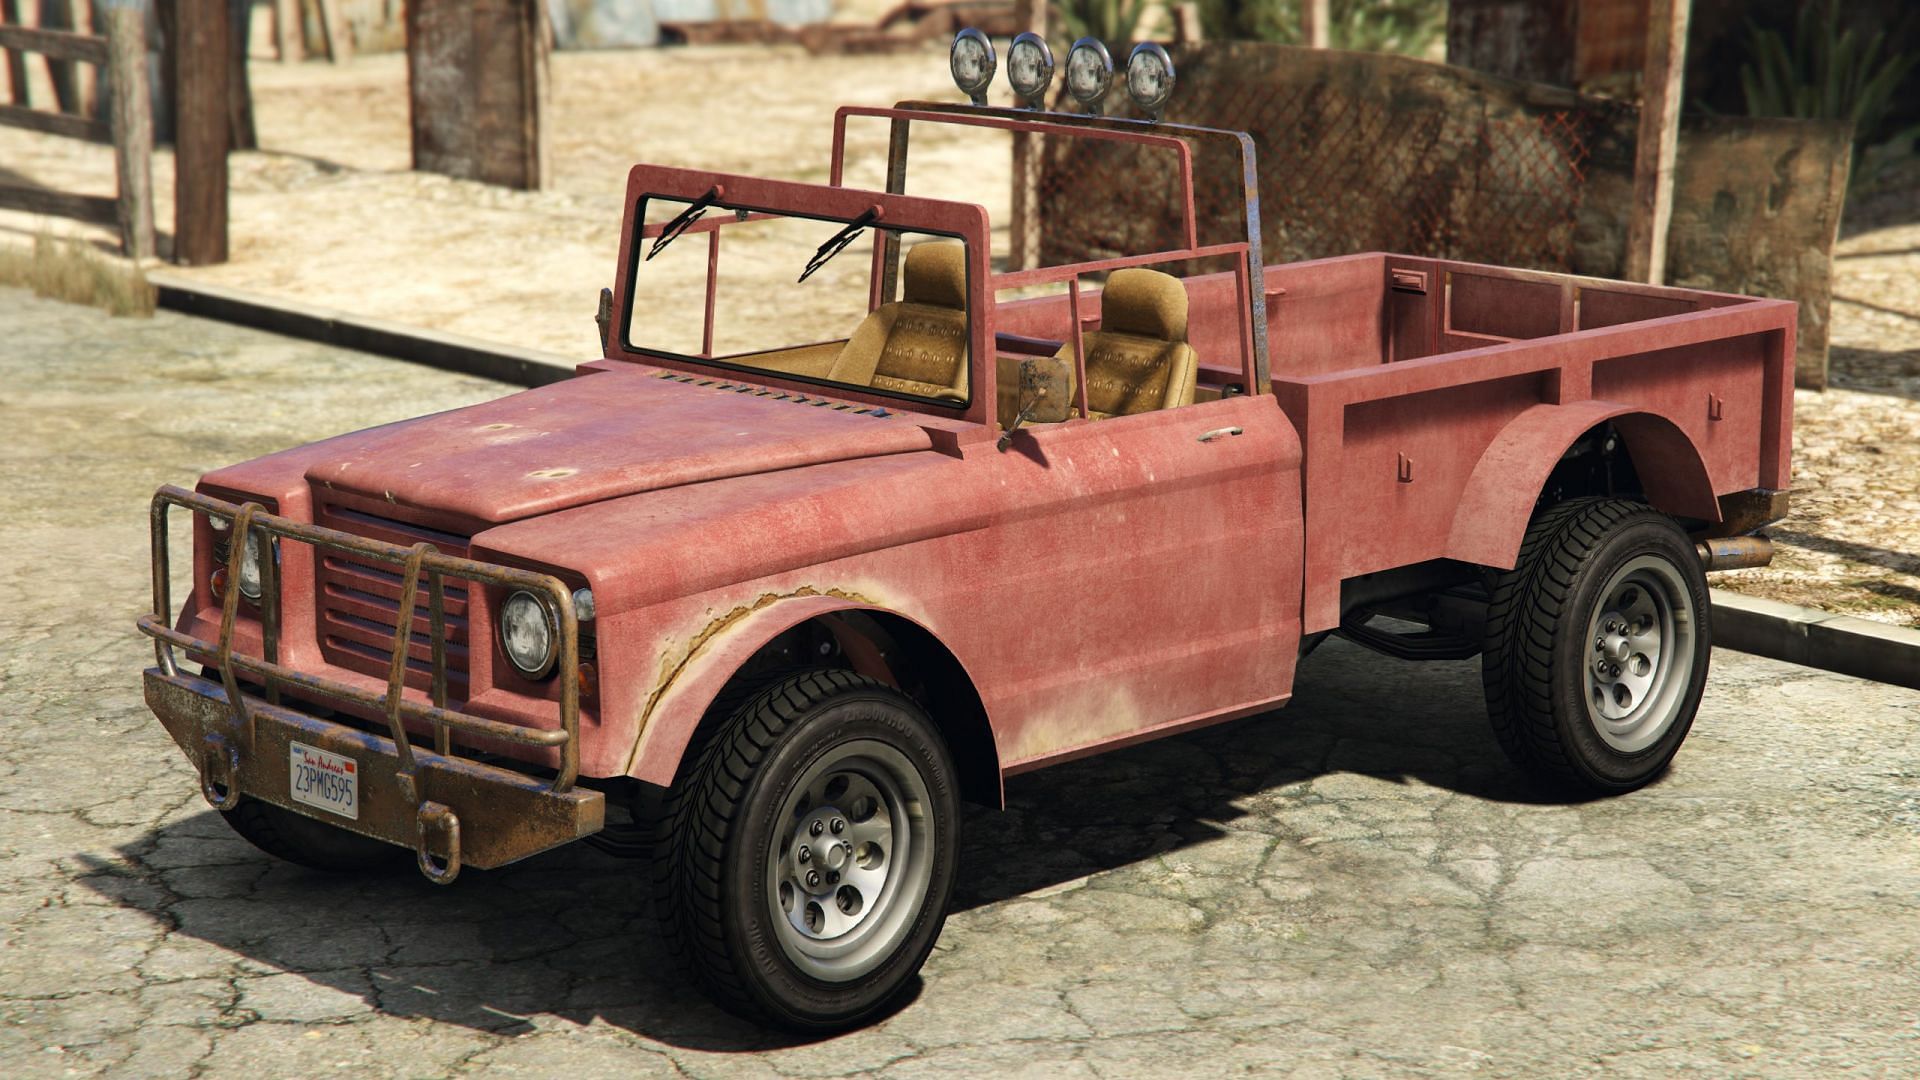 Trevor Philips drives a Canis Bodhi in GTA 5 story mode (Image via GTA Wiki)